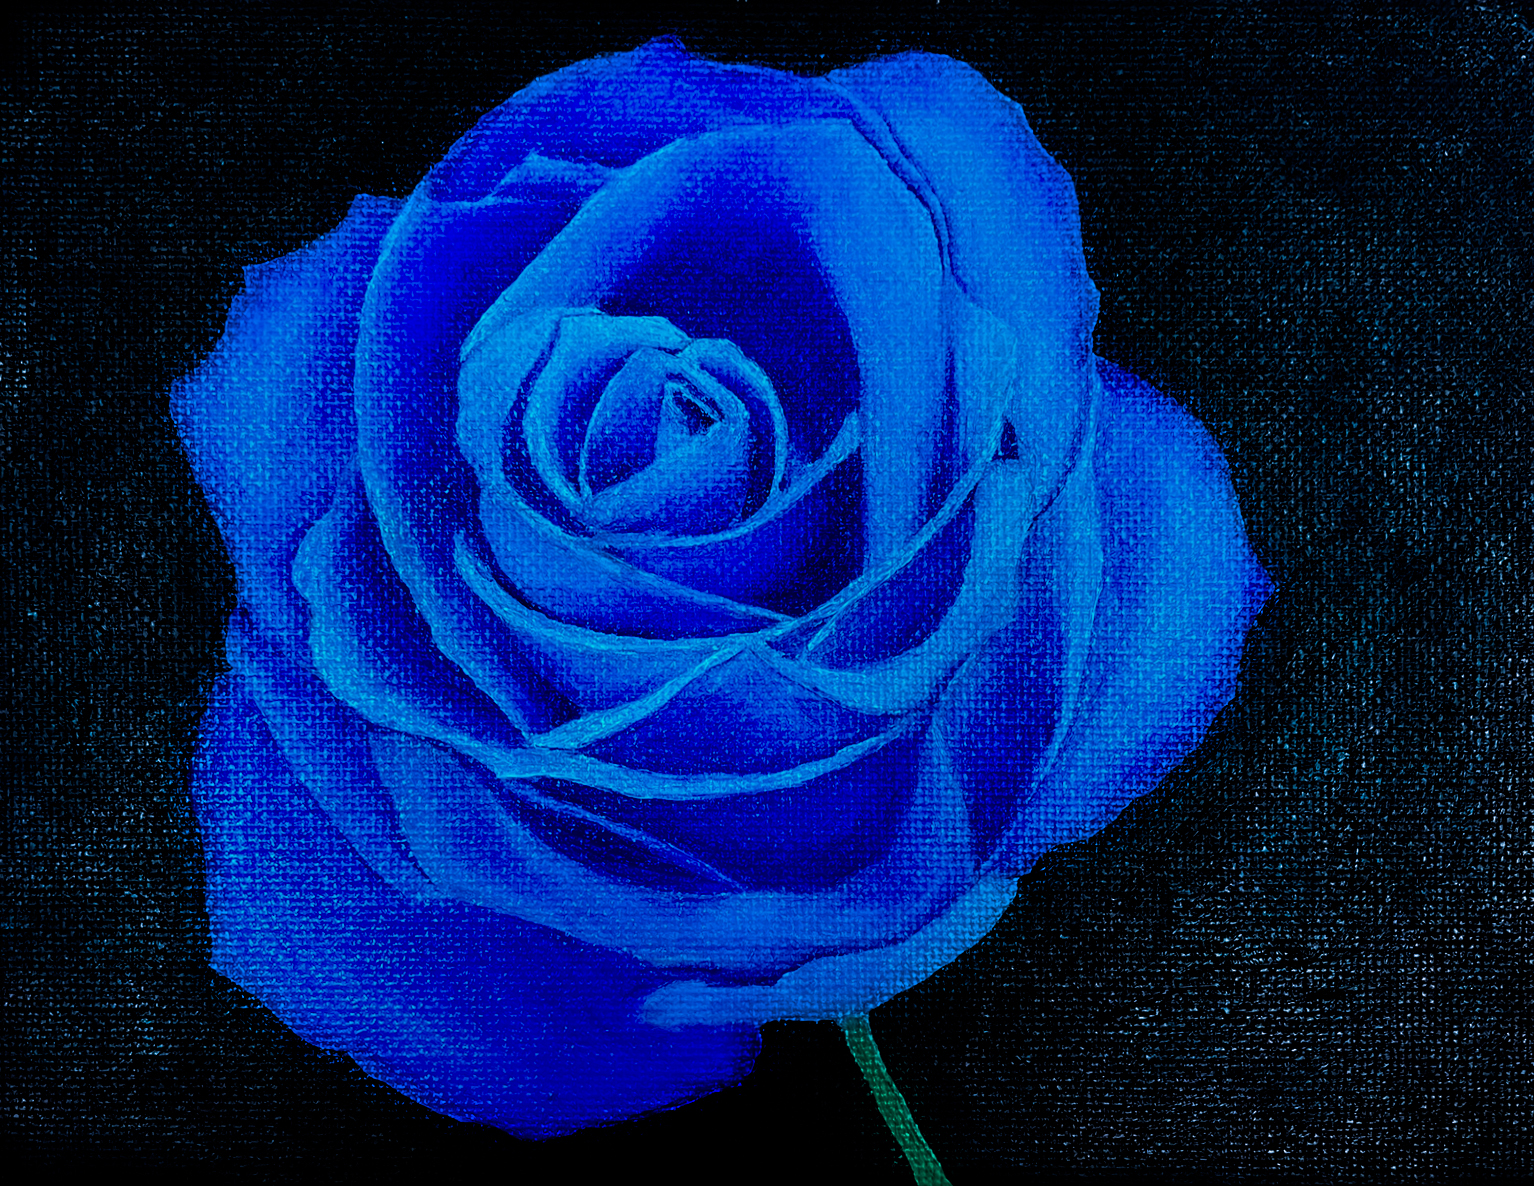 Kaitlin Barrett painting of a blue rose